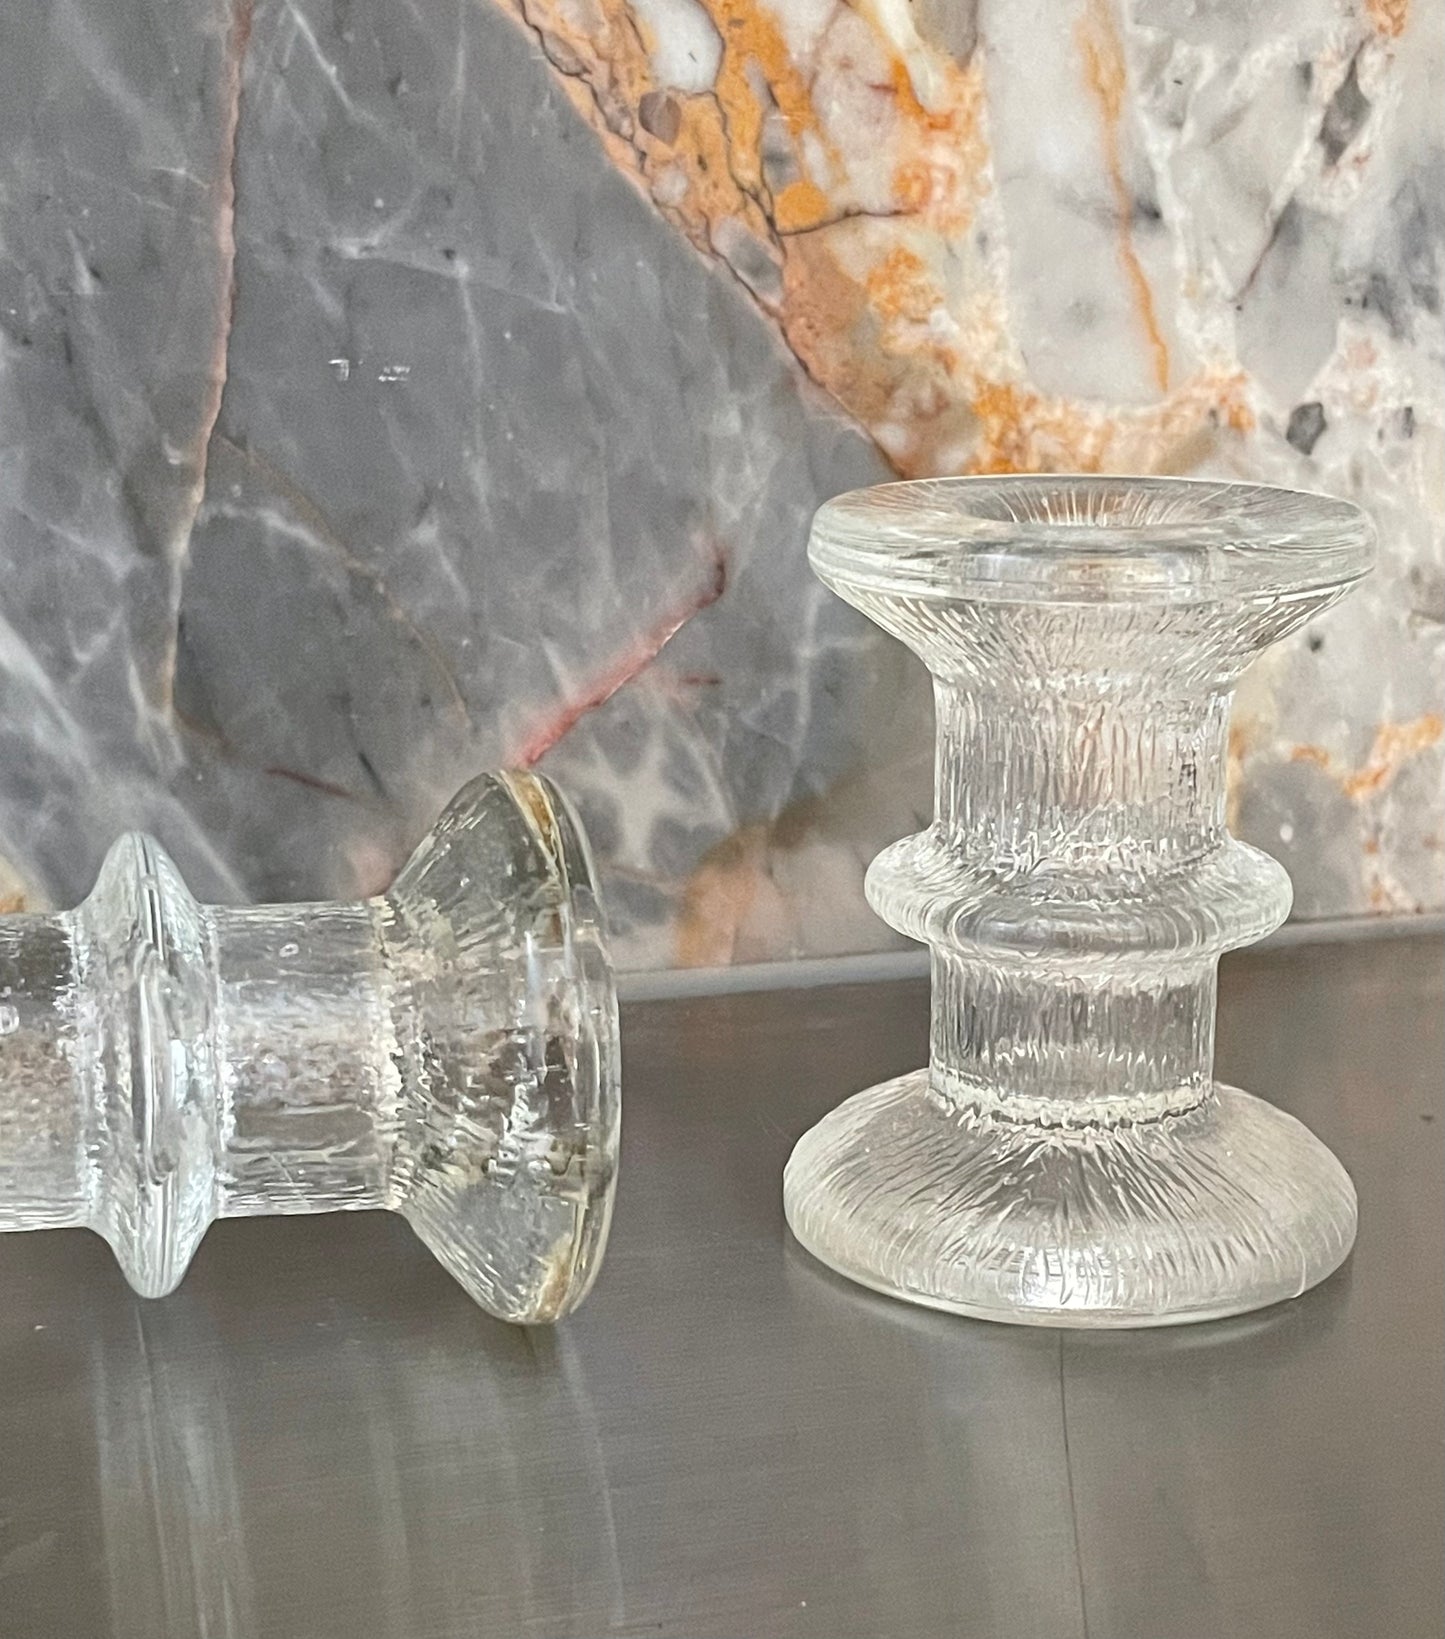 A pair of candlesticks in the style of Iittala